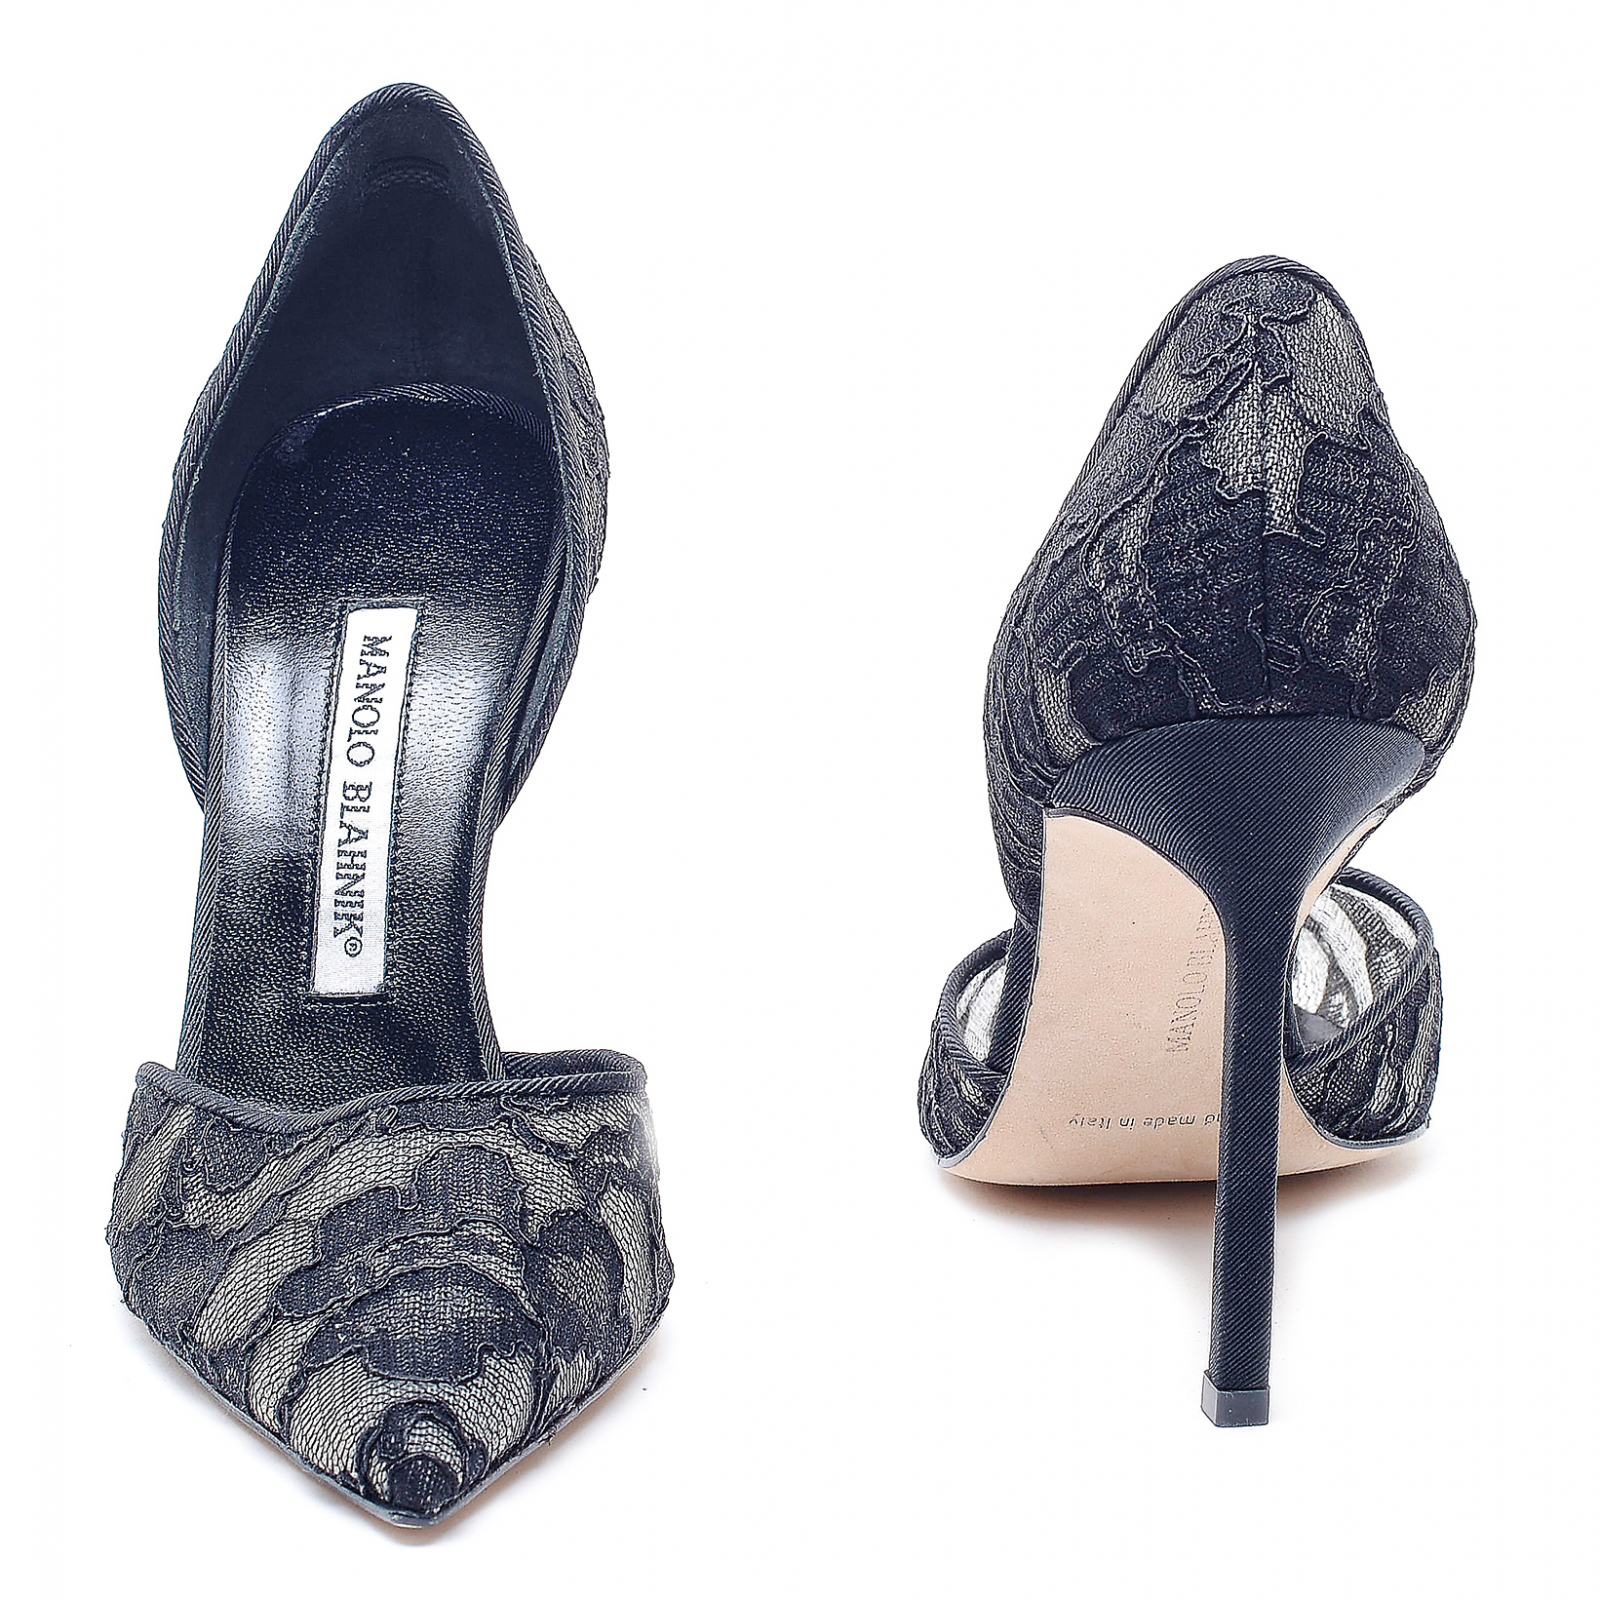 Tayler Lace Pointed d'Orsay Pump